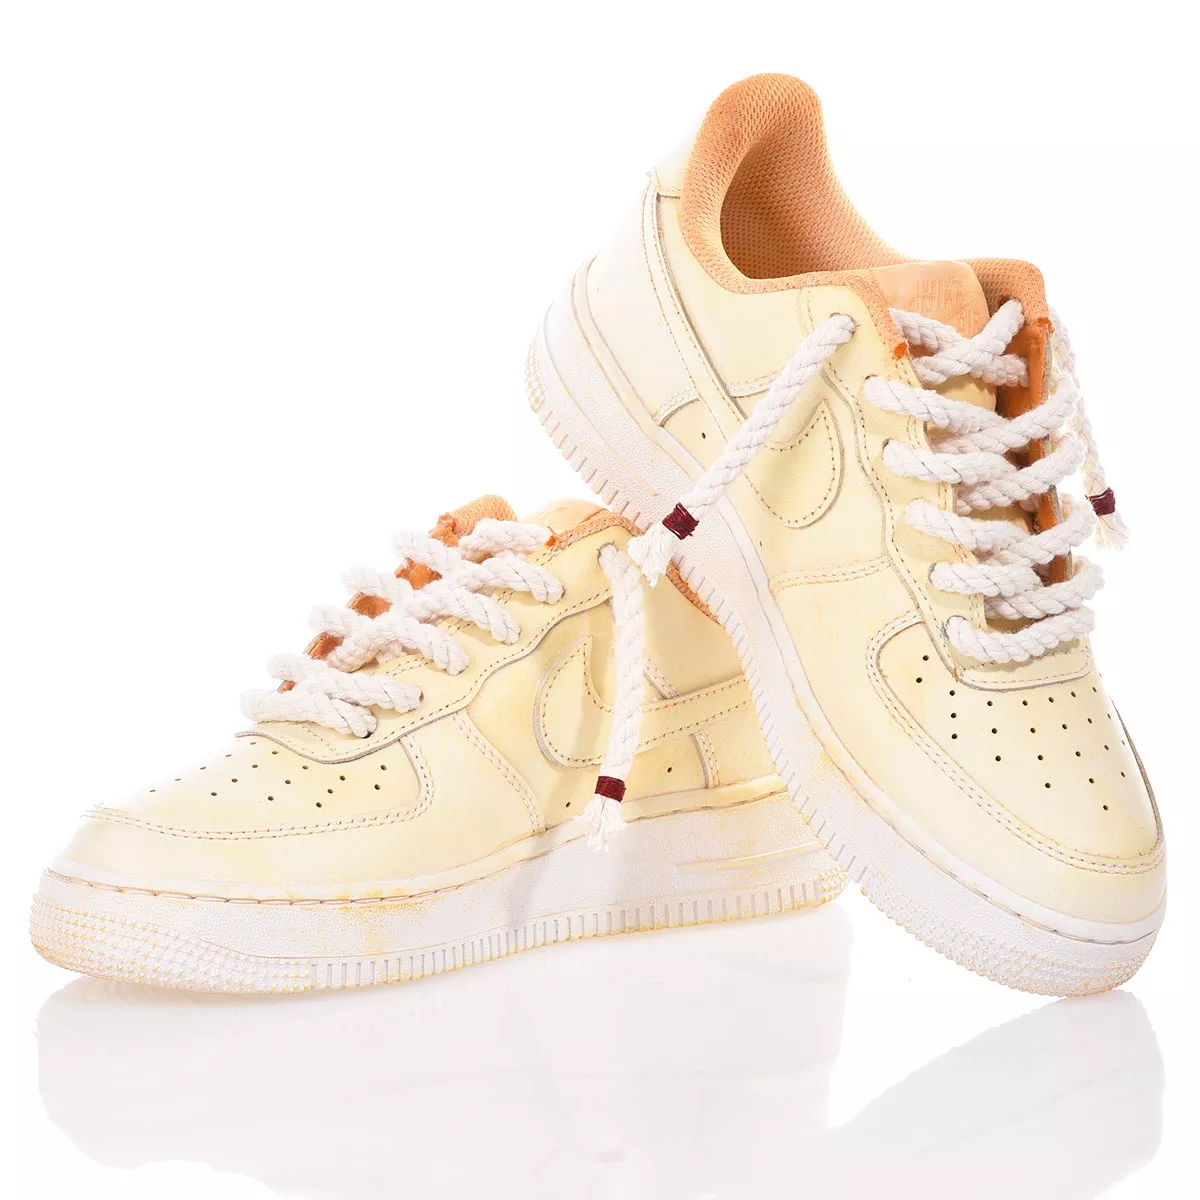 Nike Air Force 1 Dye Apricot Air Force 1 Washed-out